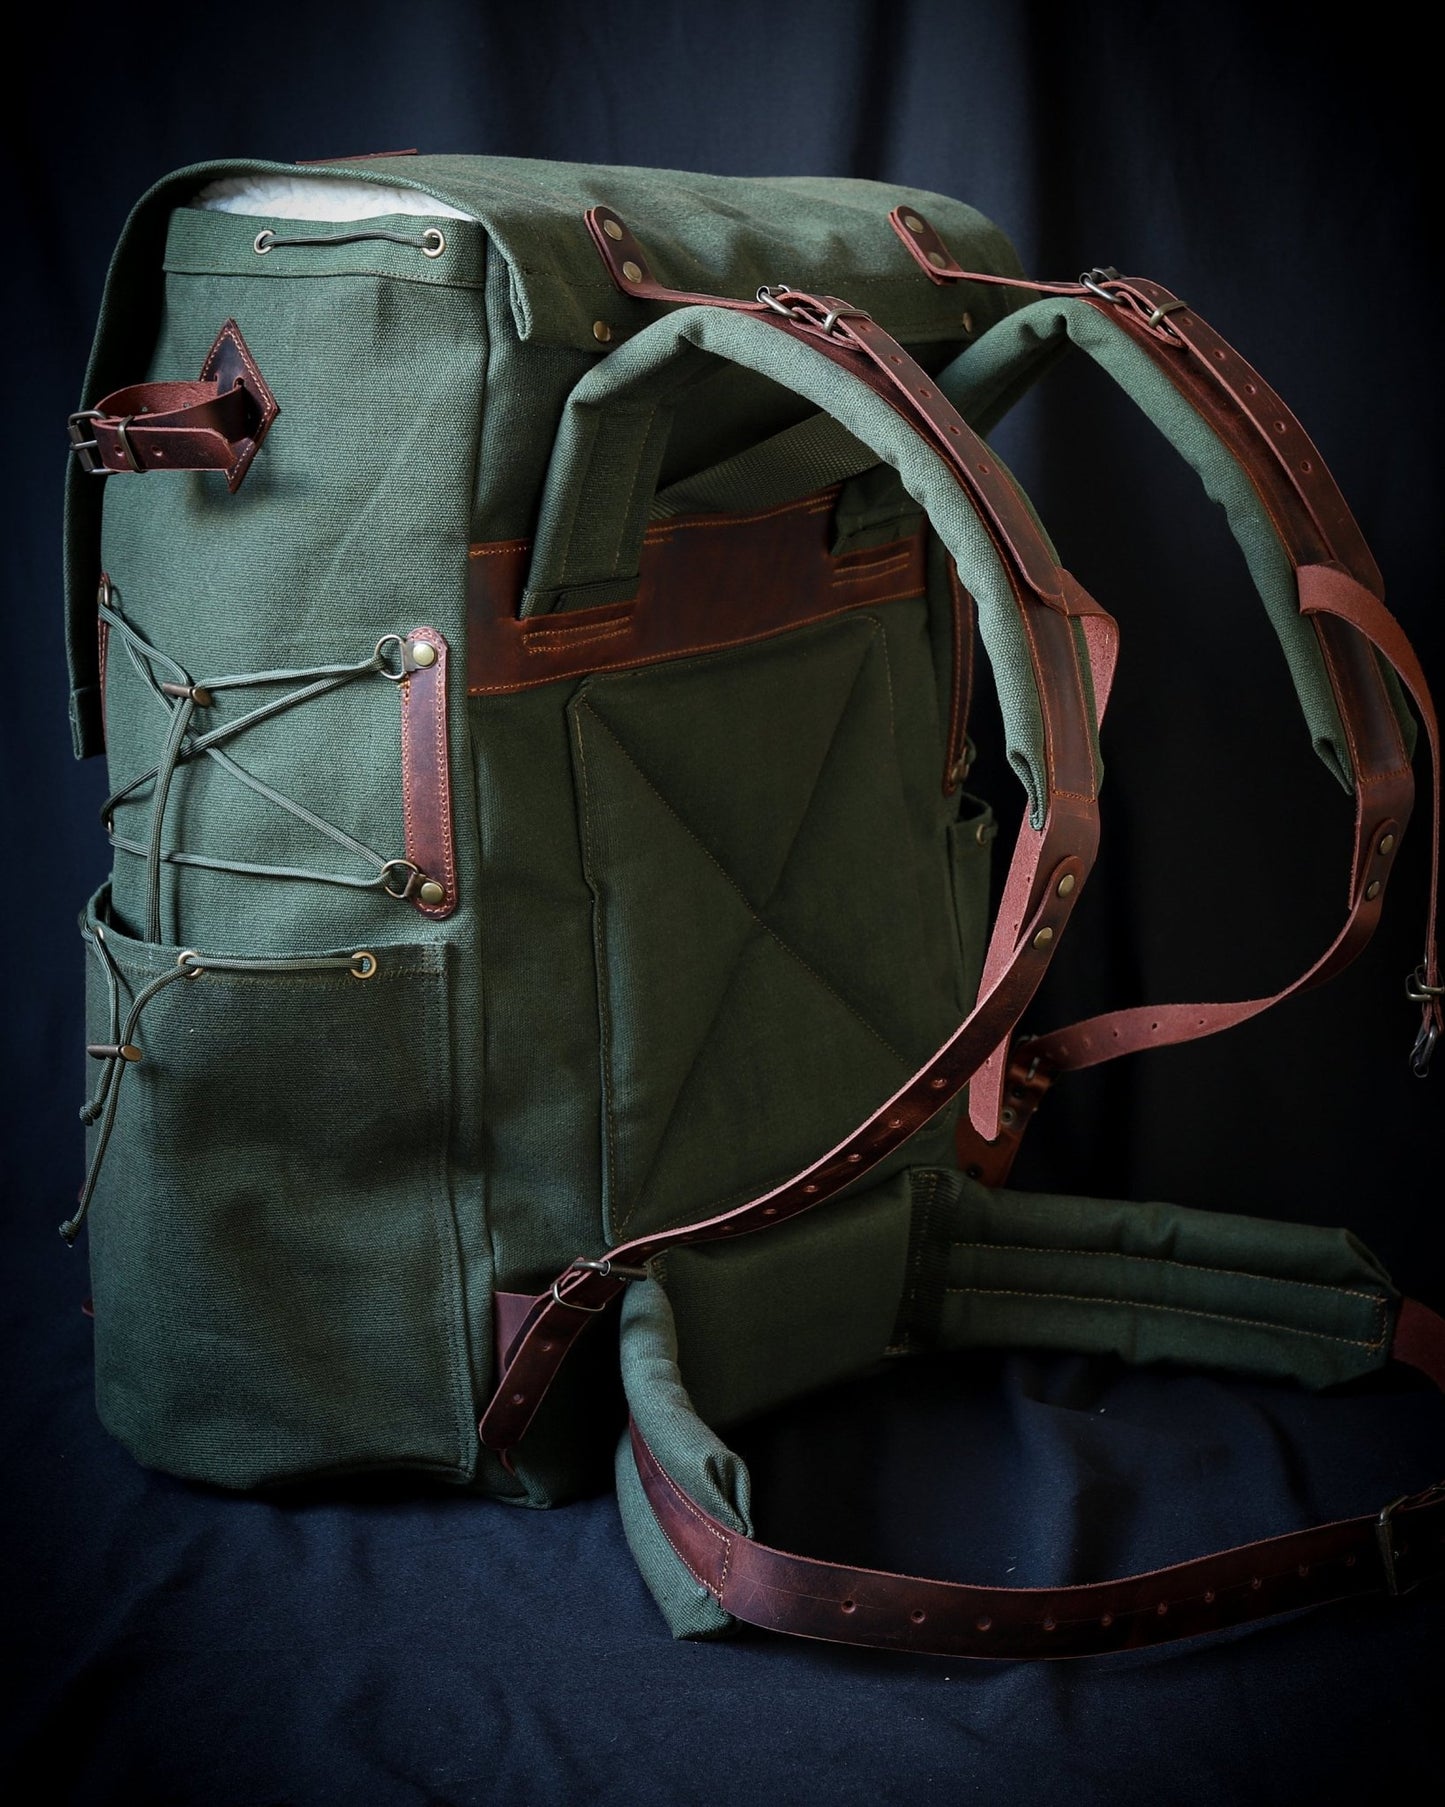 Limited Hiking Camping Backpack 30 Liter to 80 liter options Black Brown Green Options  99percenthandmade Khaki Green 30 Liters 